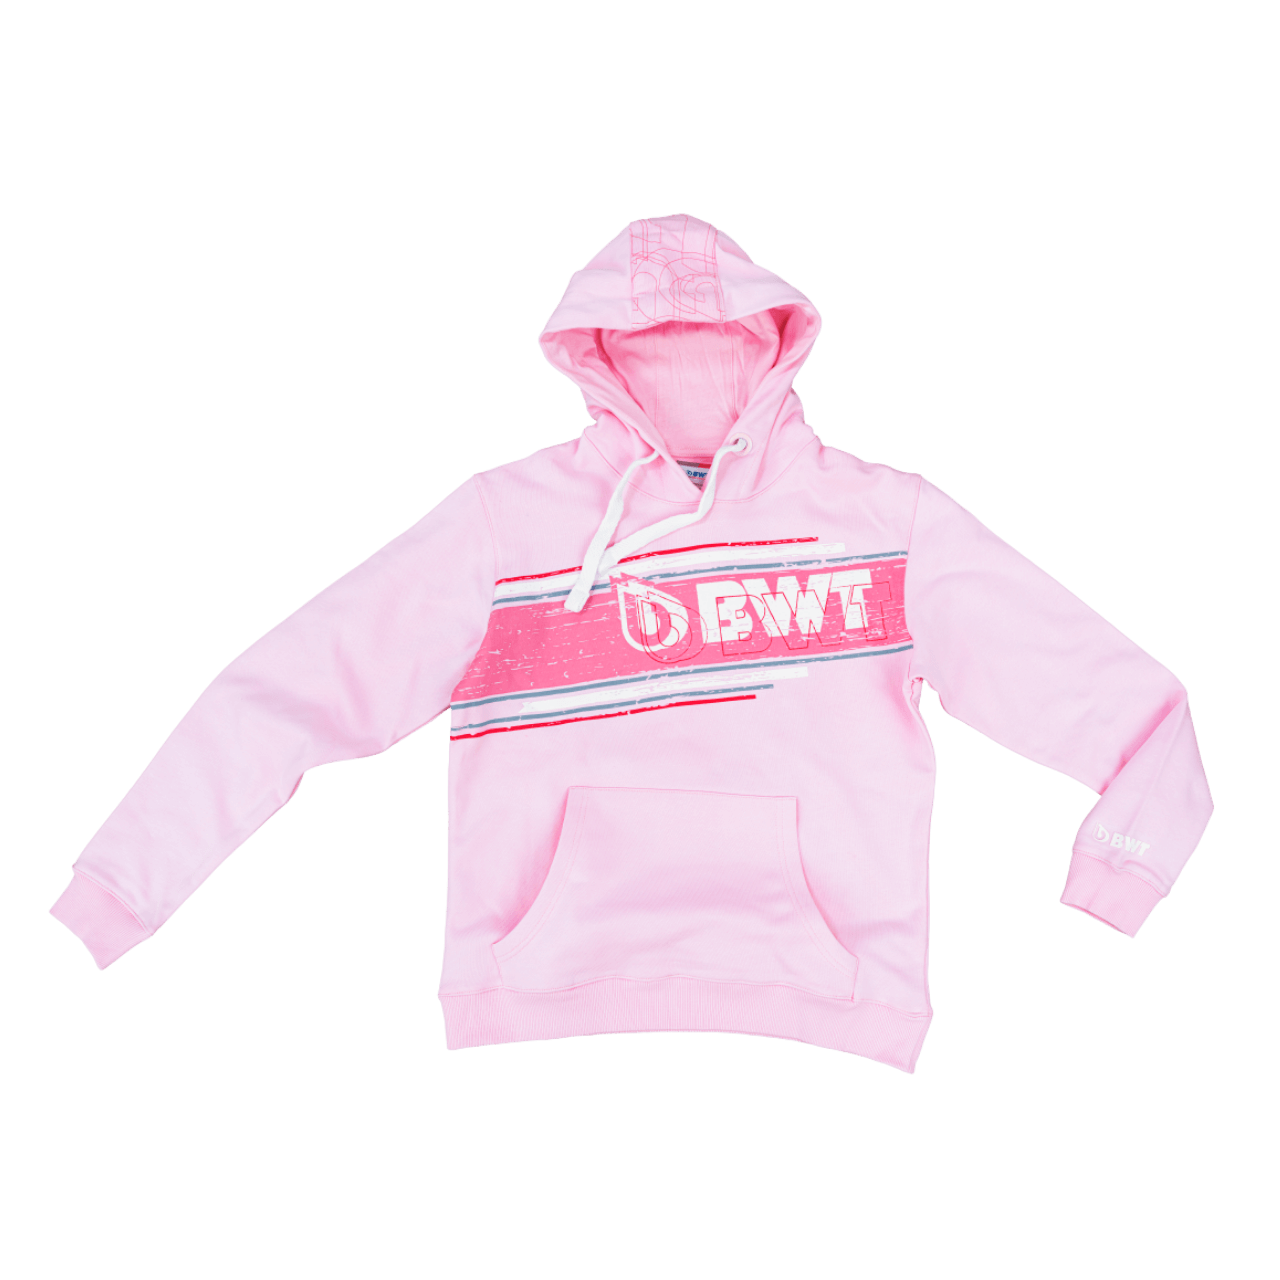 BWT Lifestyle Hoodie men pink with white BWT writing on pink background on the chest